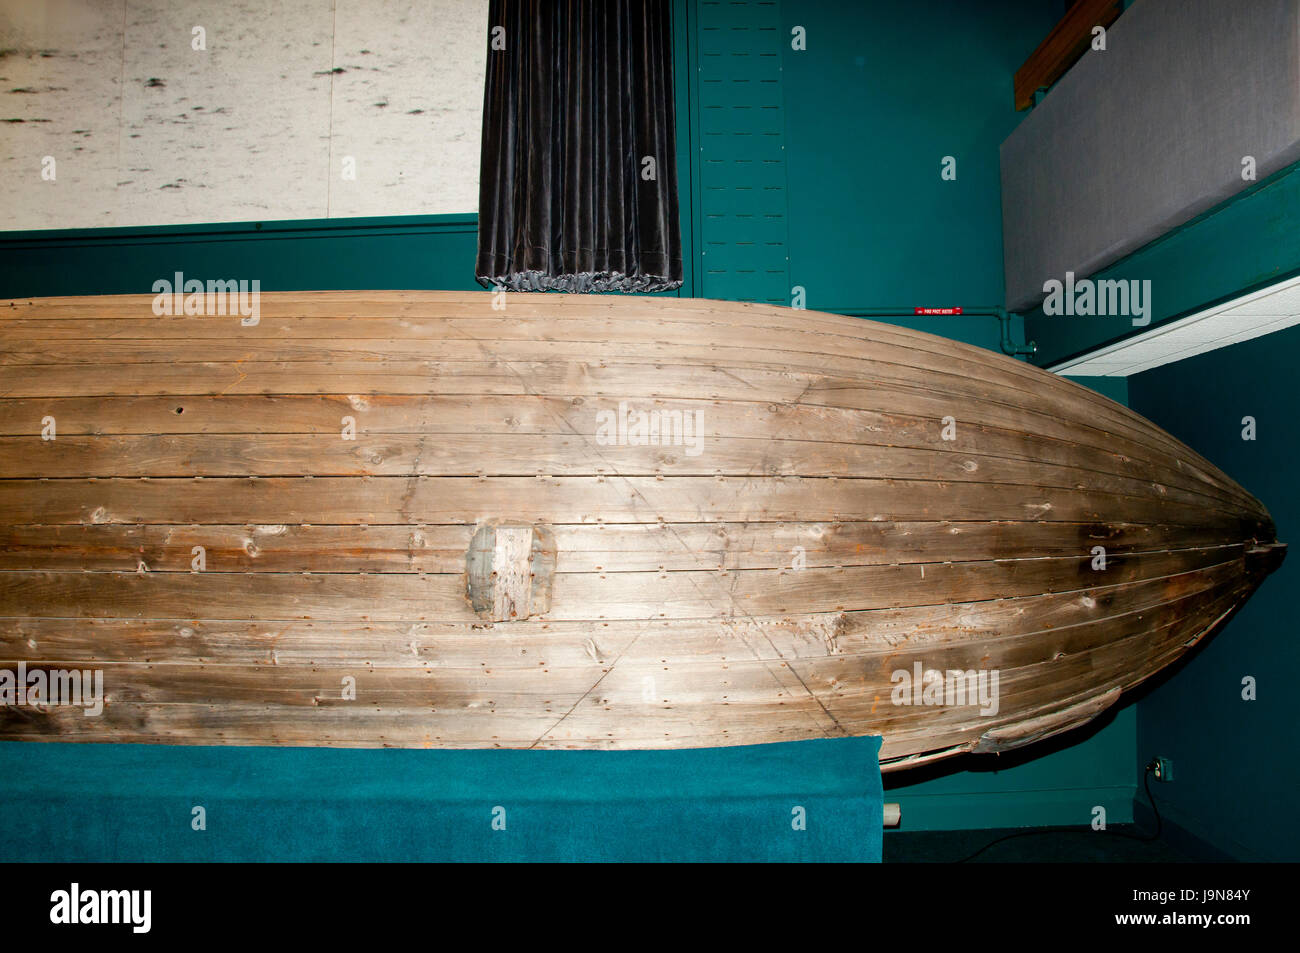 BADDECK, CANADA - August 13, 2016: Wooden submarine boat prototype on display in the Alexander Graham Bell National Historic Site Stock Photo